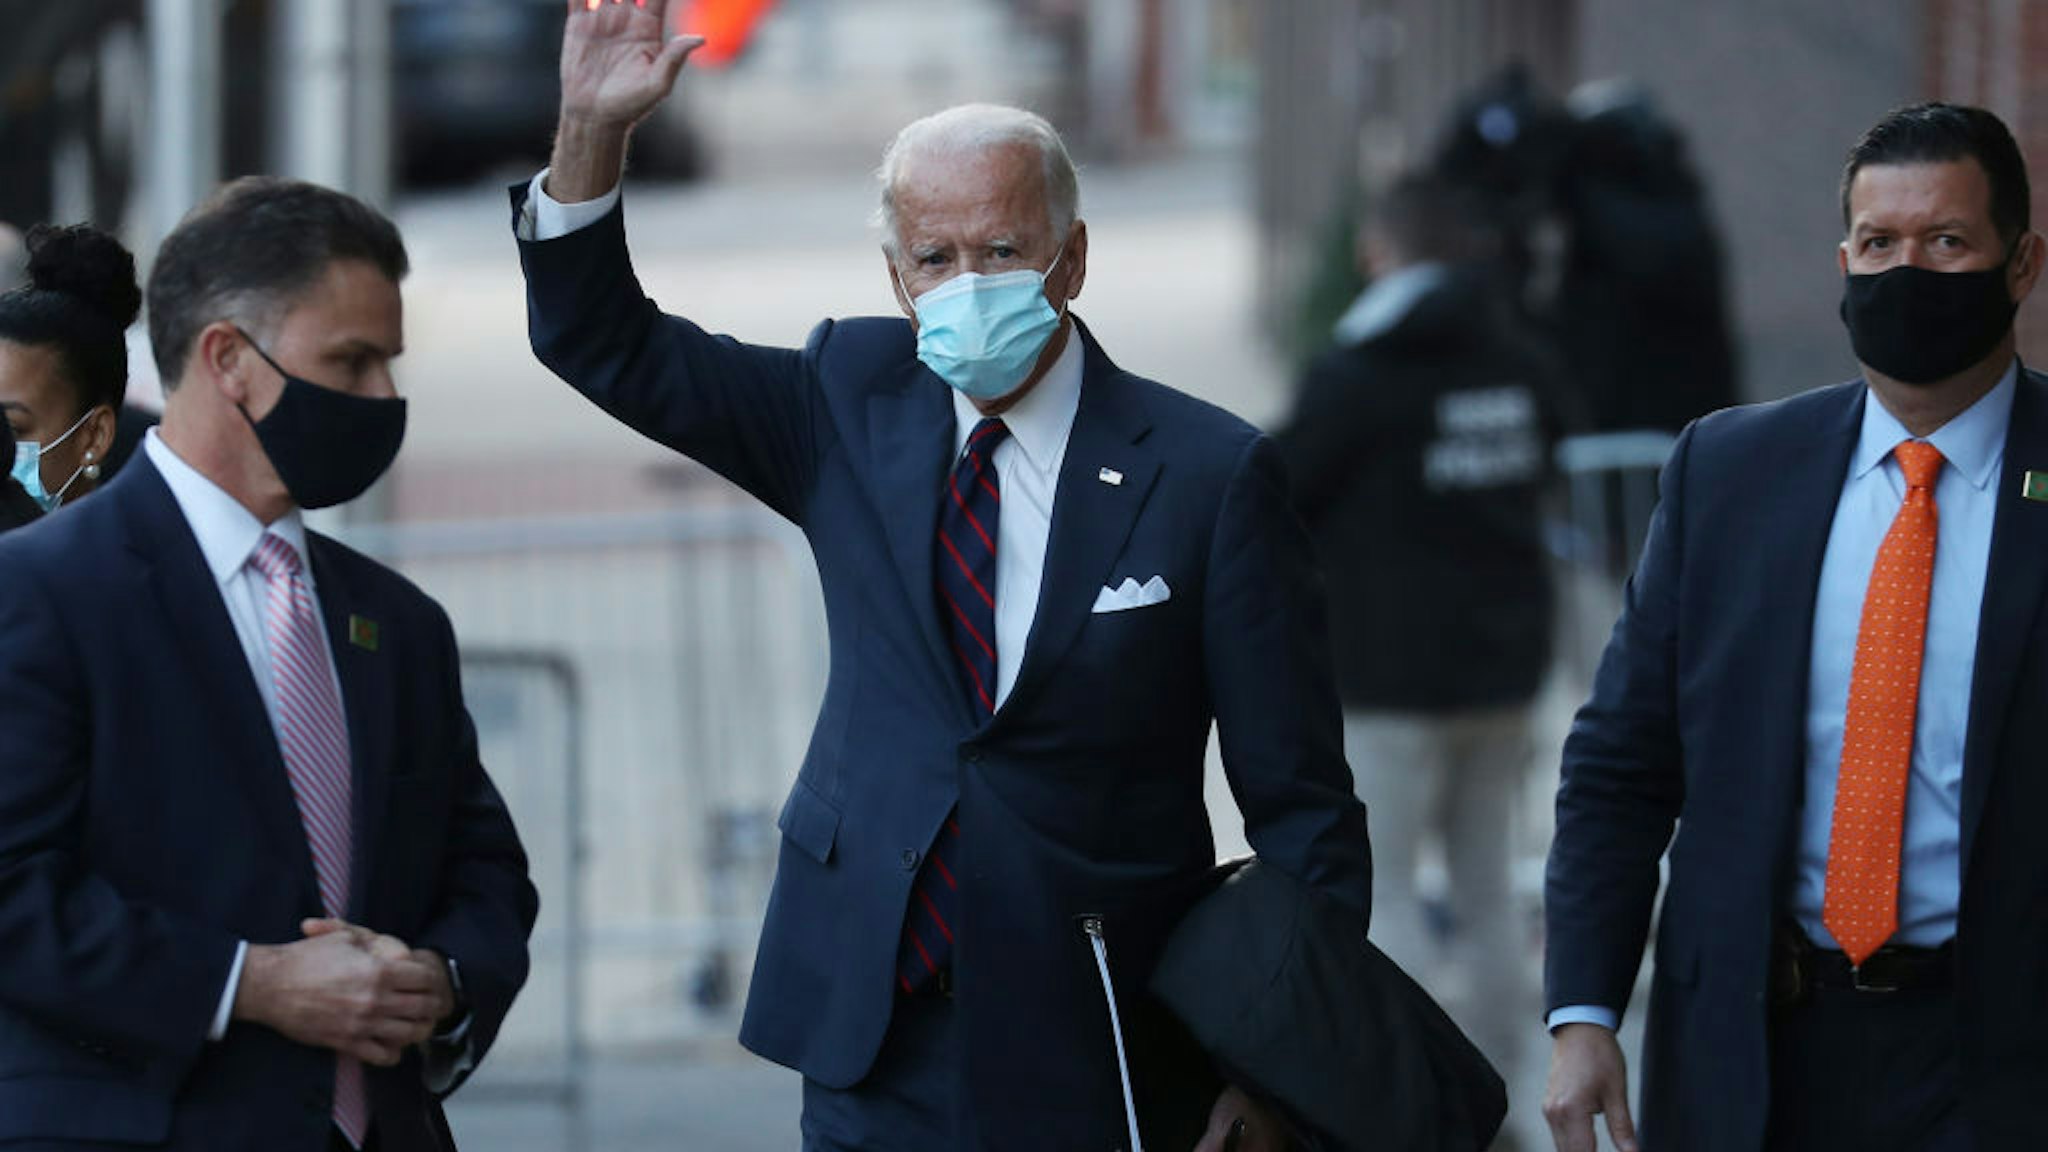 U.S. President-elect Joe Biden waves as he leaves the Queen Theater after receiving a briefing on national security wiith advisors on November 17, 2020 in Wilmington, Delaware.